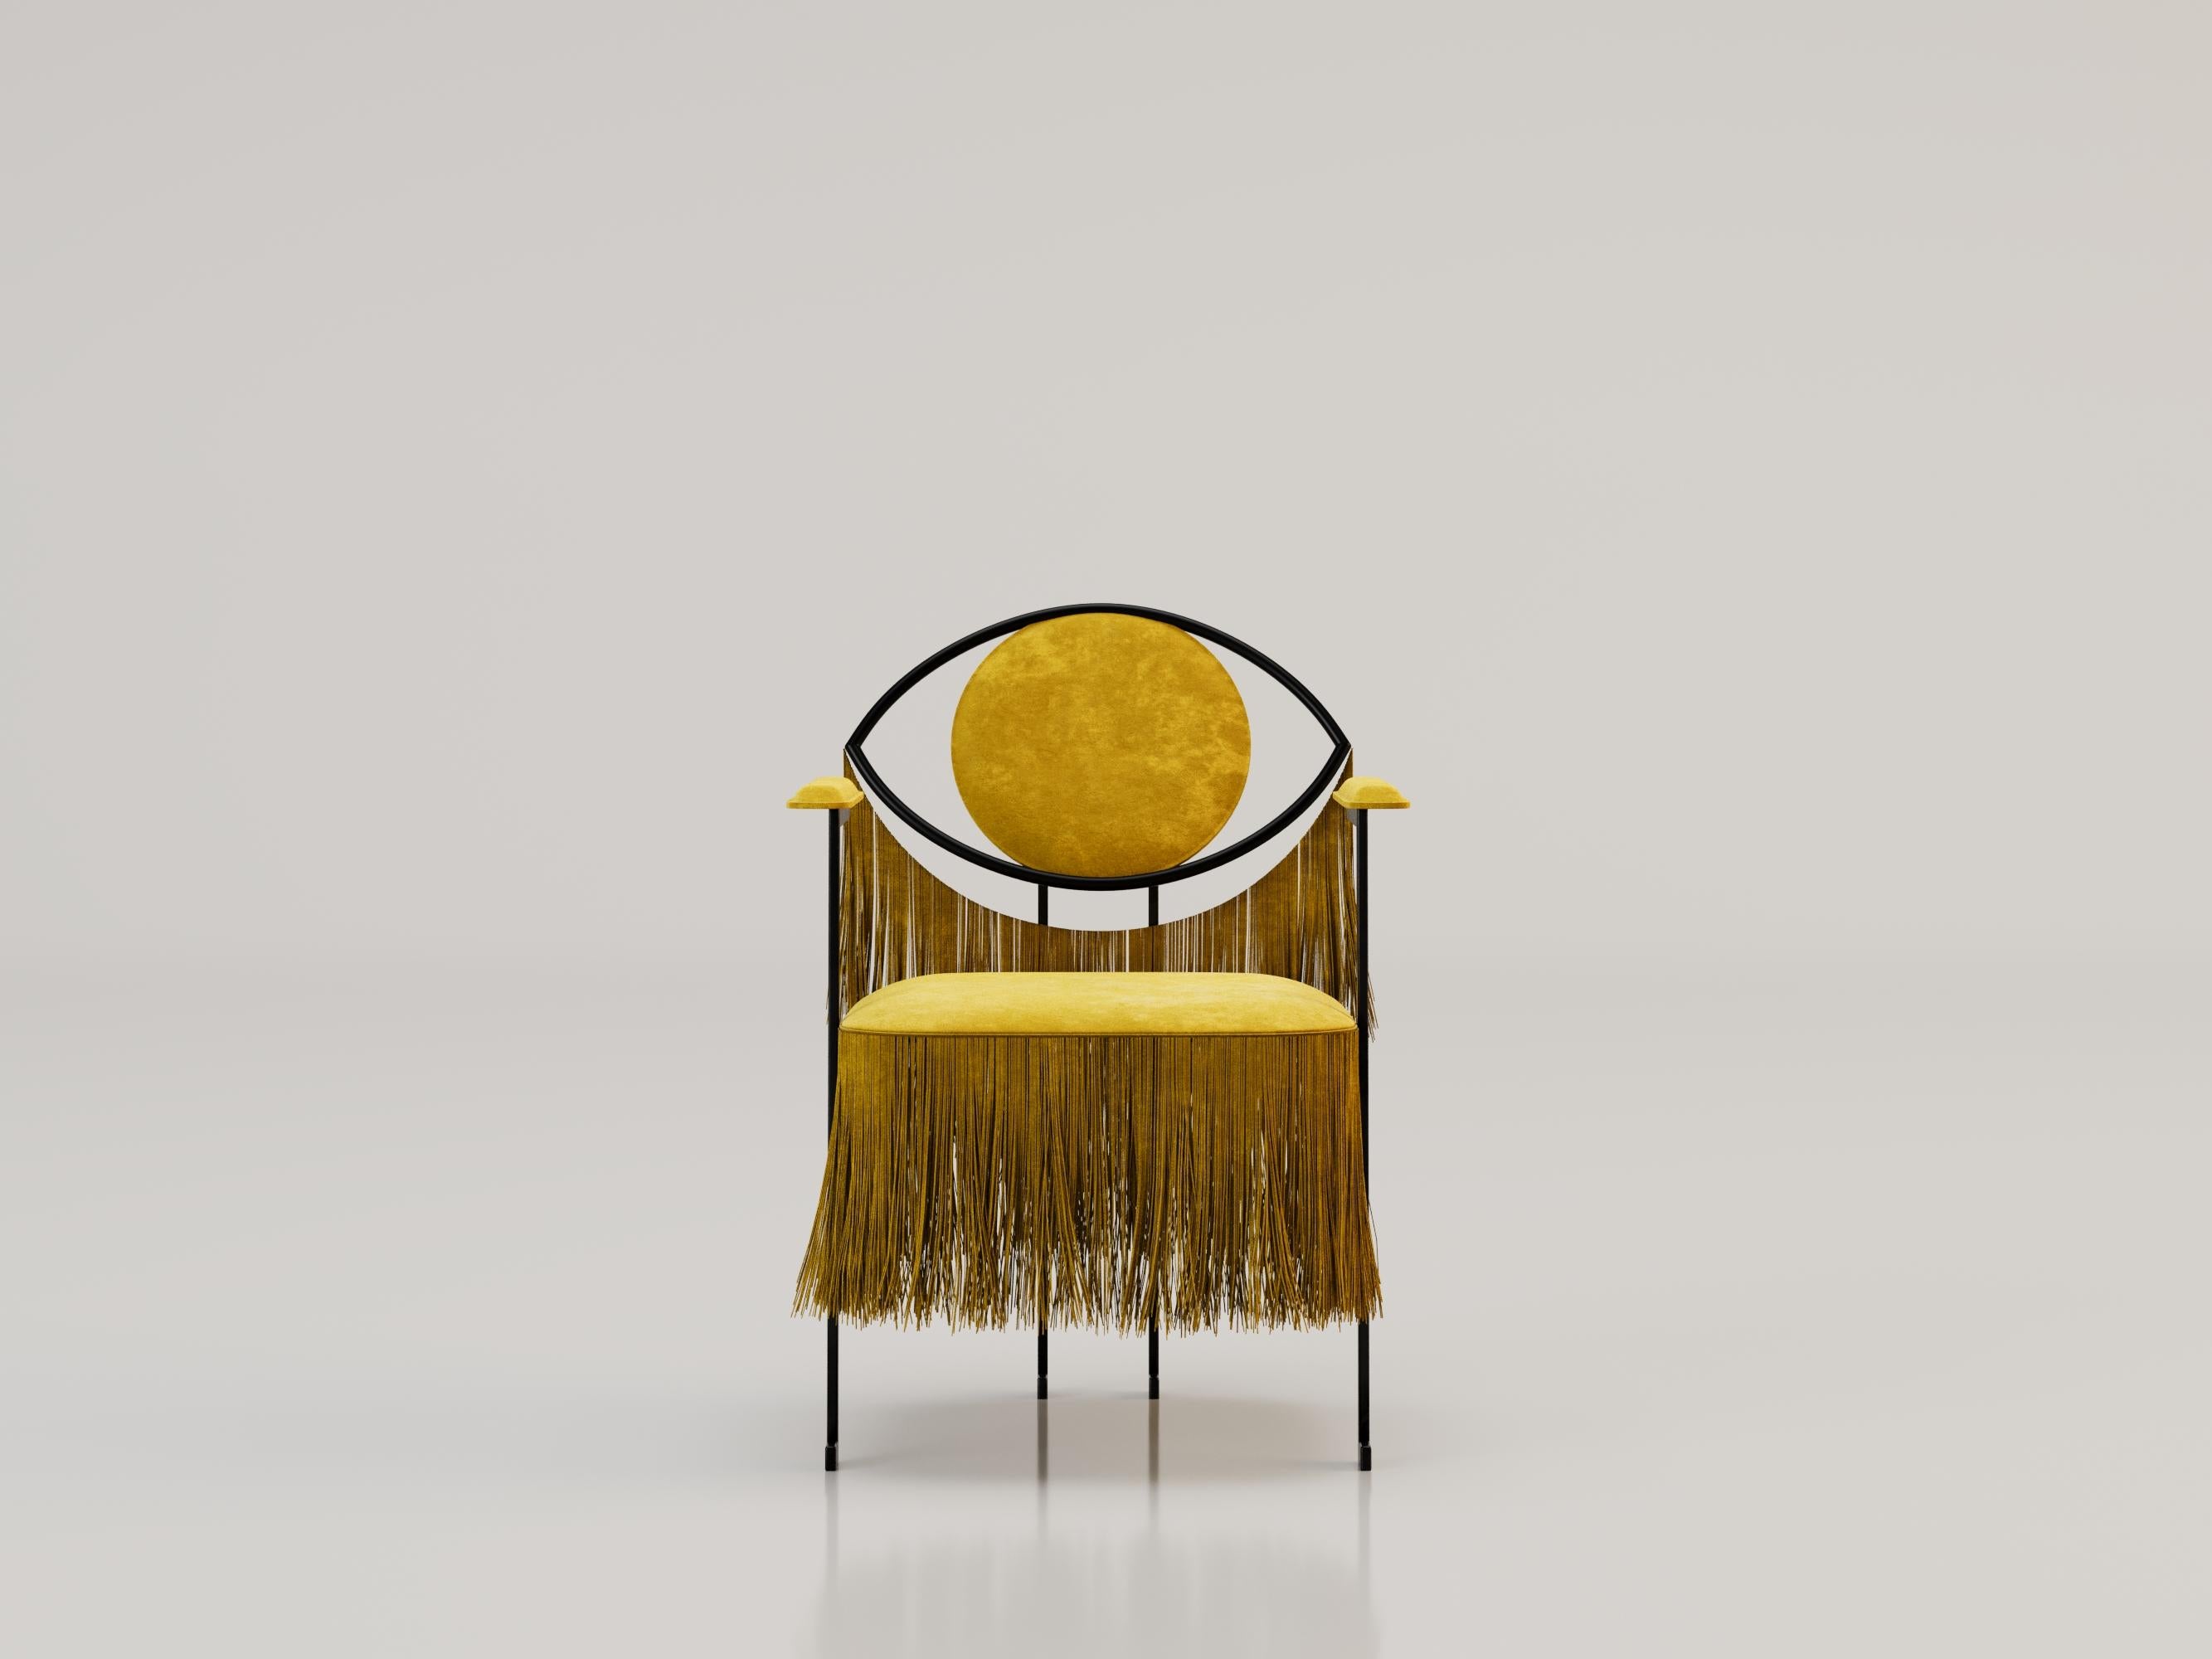 LA MYSTERIEUSE Chair by Alexandre Ligios

METAL AND VELVET

L 33 x W 21 X H 31

The chair features a sleek metal frame that gives it a contemporary and elegant look. Its velvet seat adorned with fringes adds a touch of luxury and texture, creating a